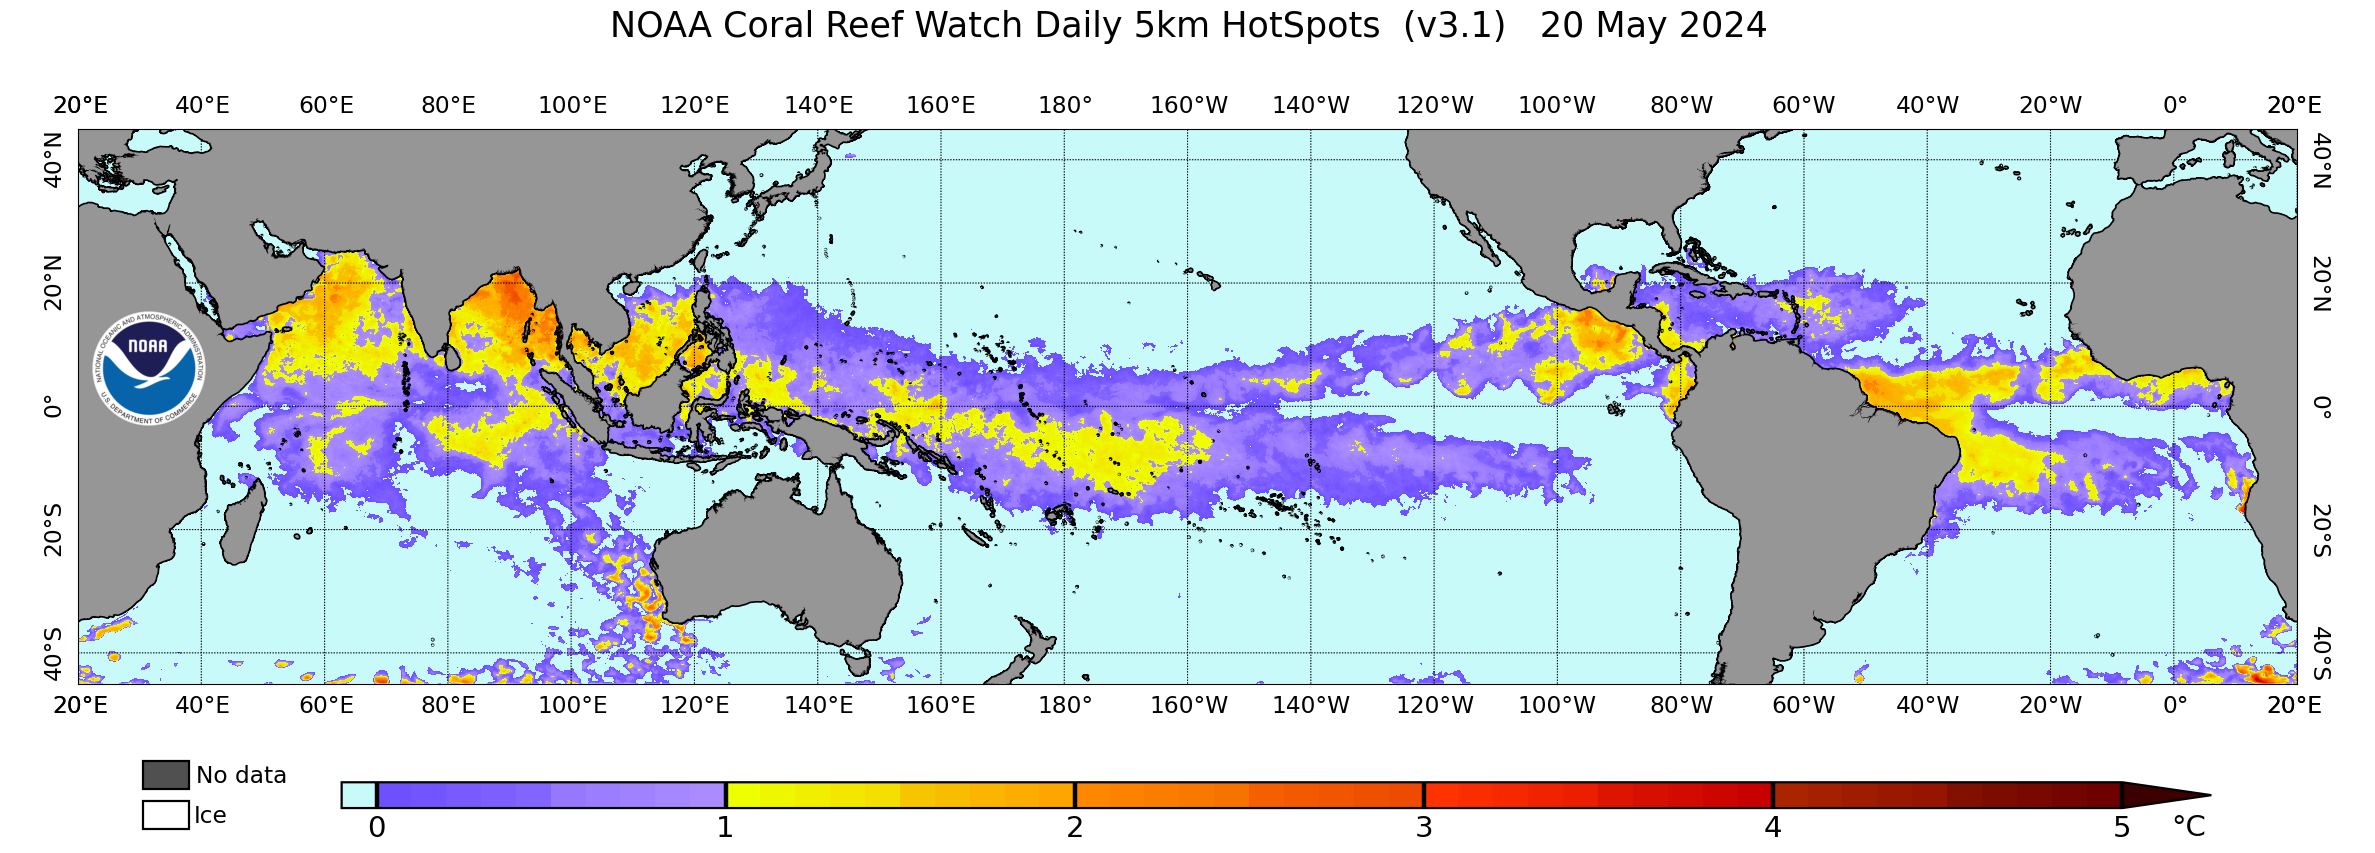 Current daily global 5km Coral Bleaching HotSpot image